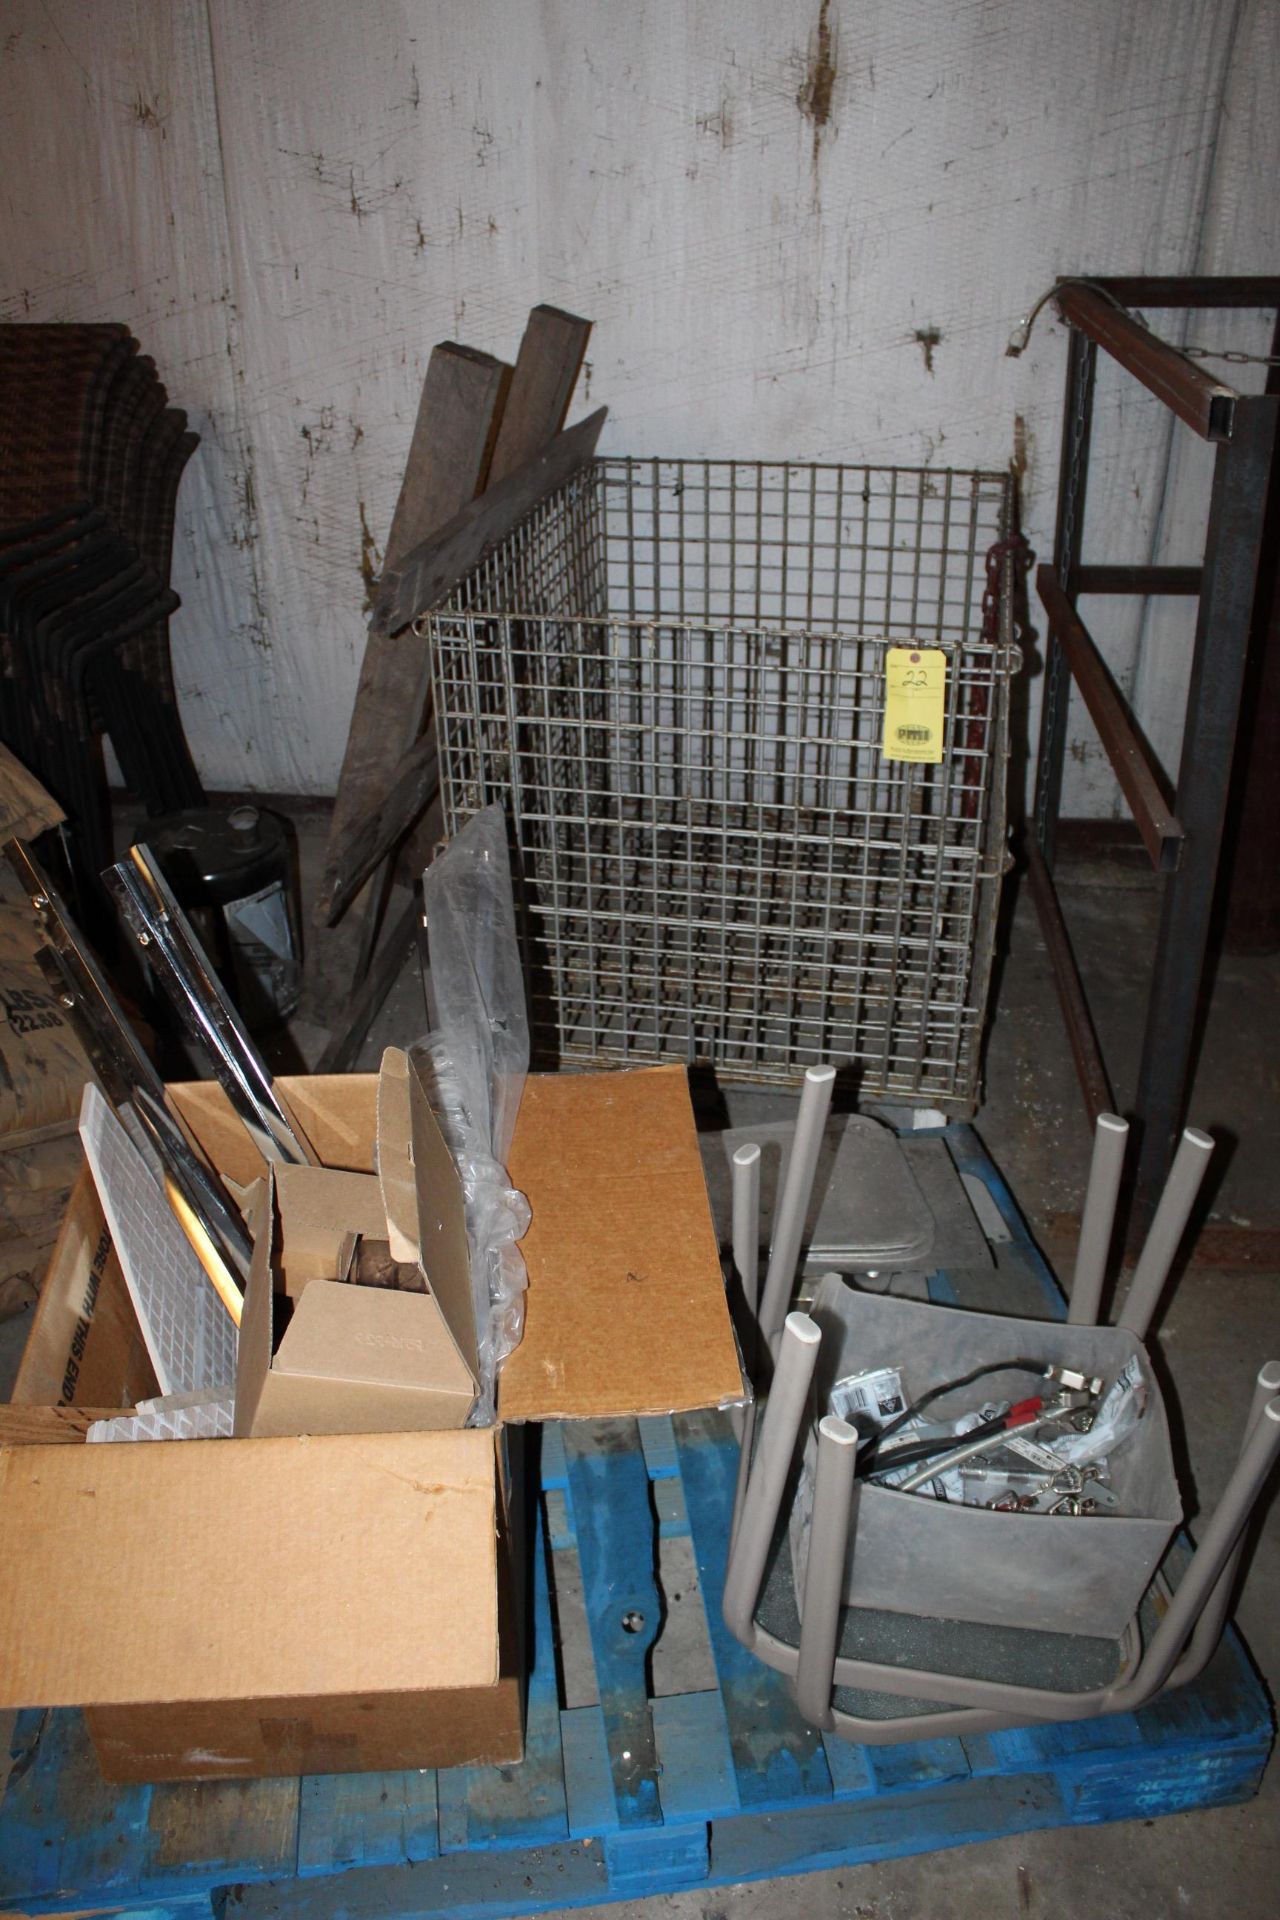 LOT CONSISTING OF: collapsible metal basket & blue wooden pallet w/assorted metal parts (Located at: